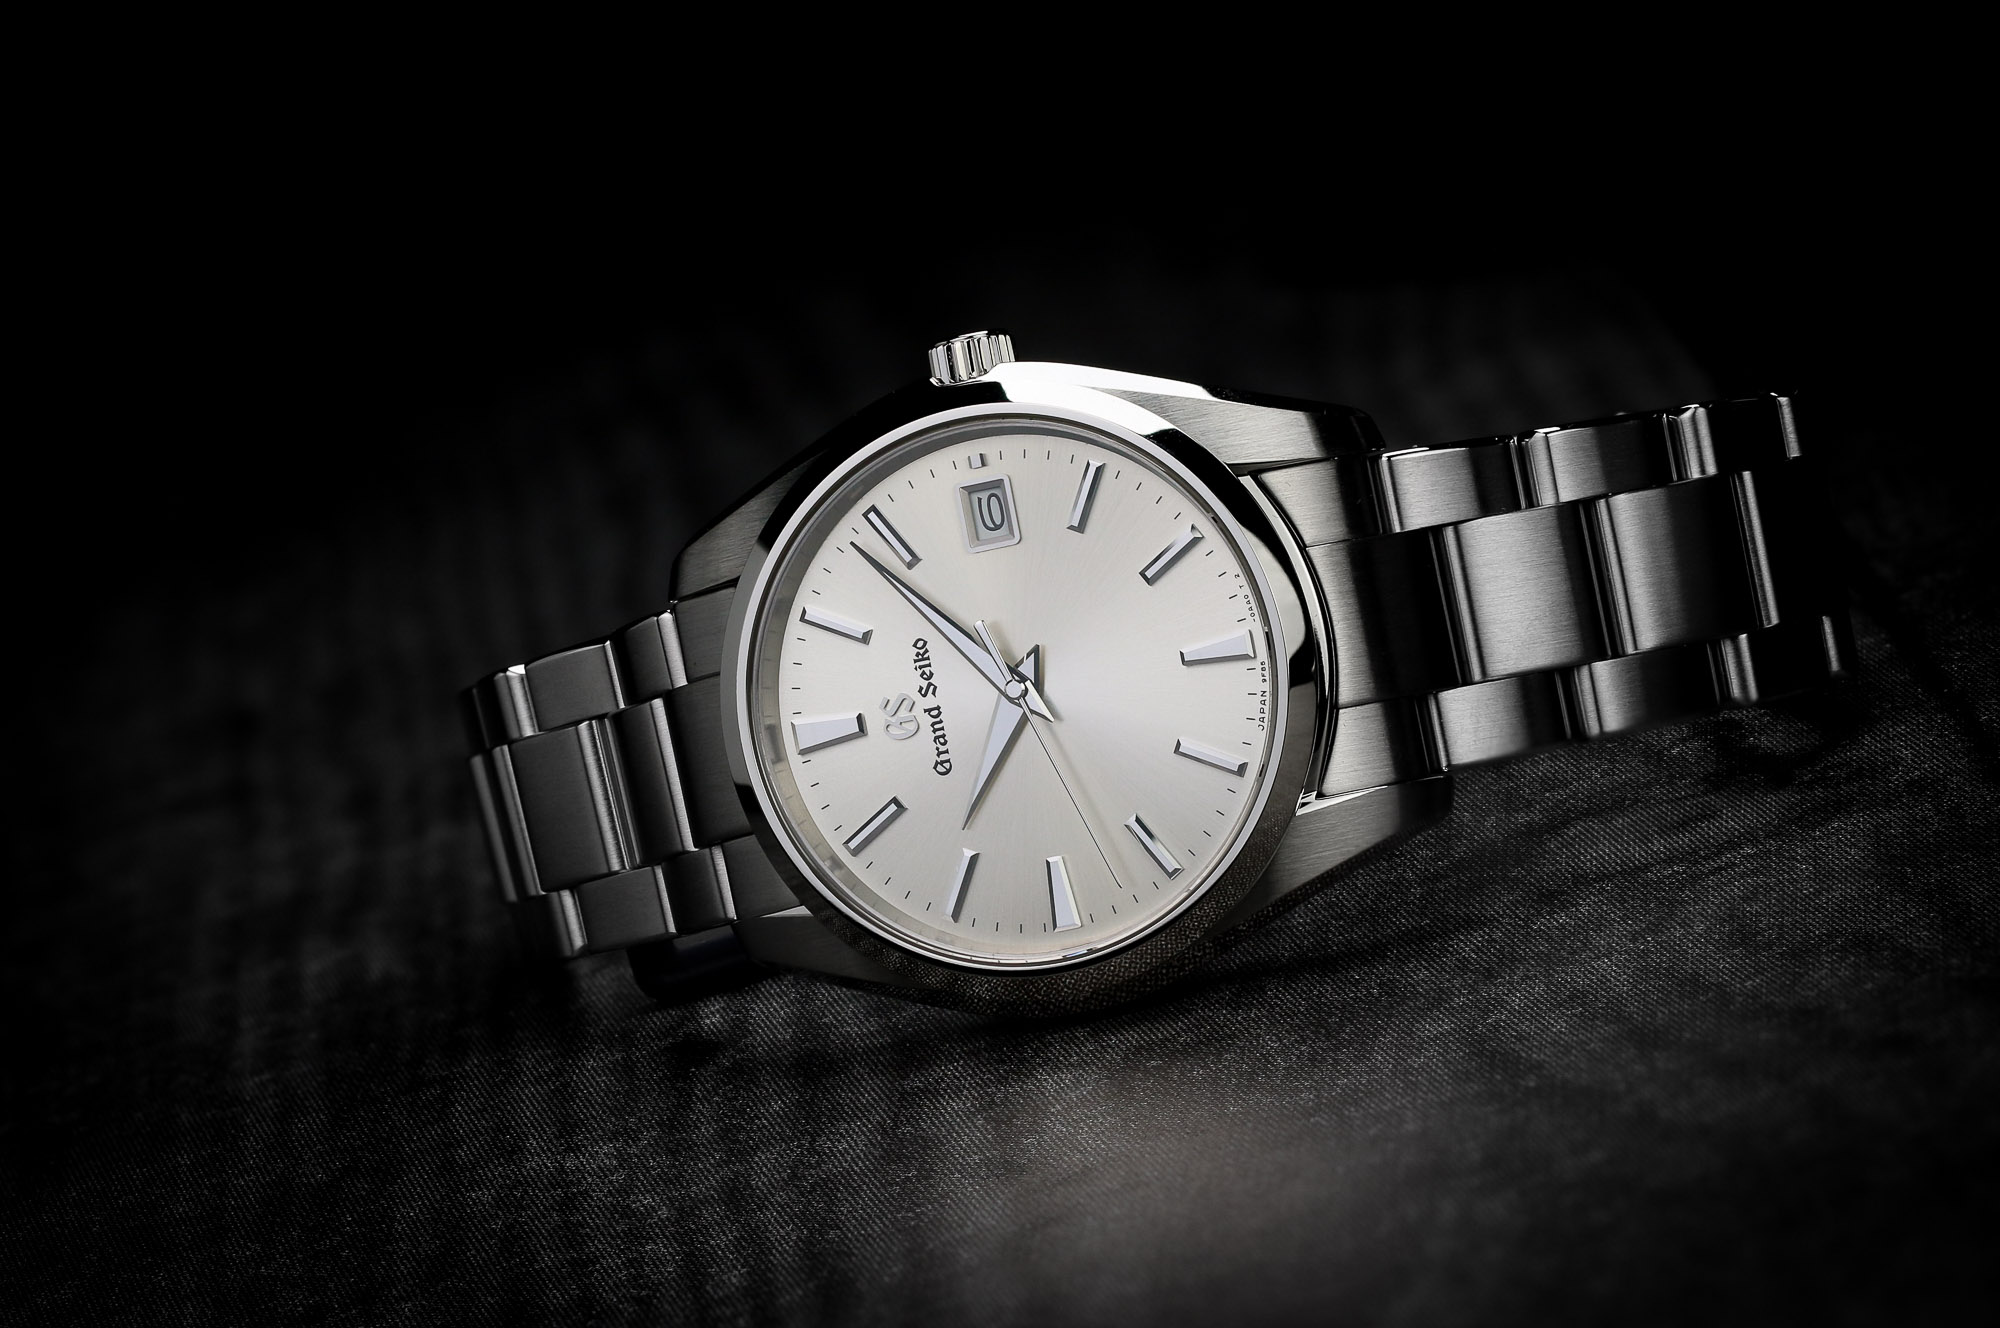 Grand Seiko SBGP009 stainless steel wristwatch with a light dial.